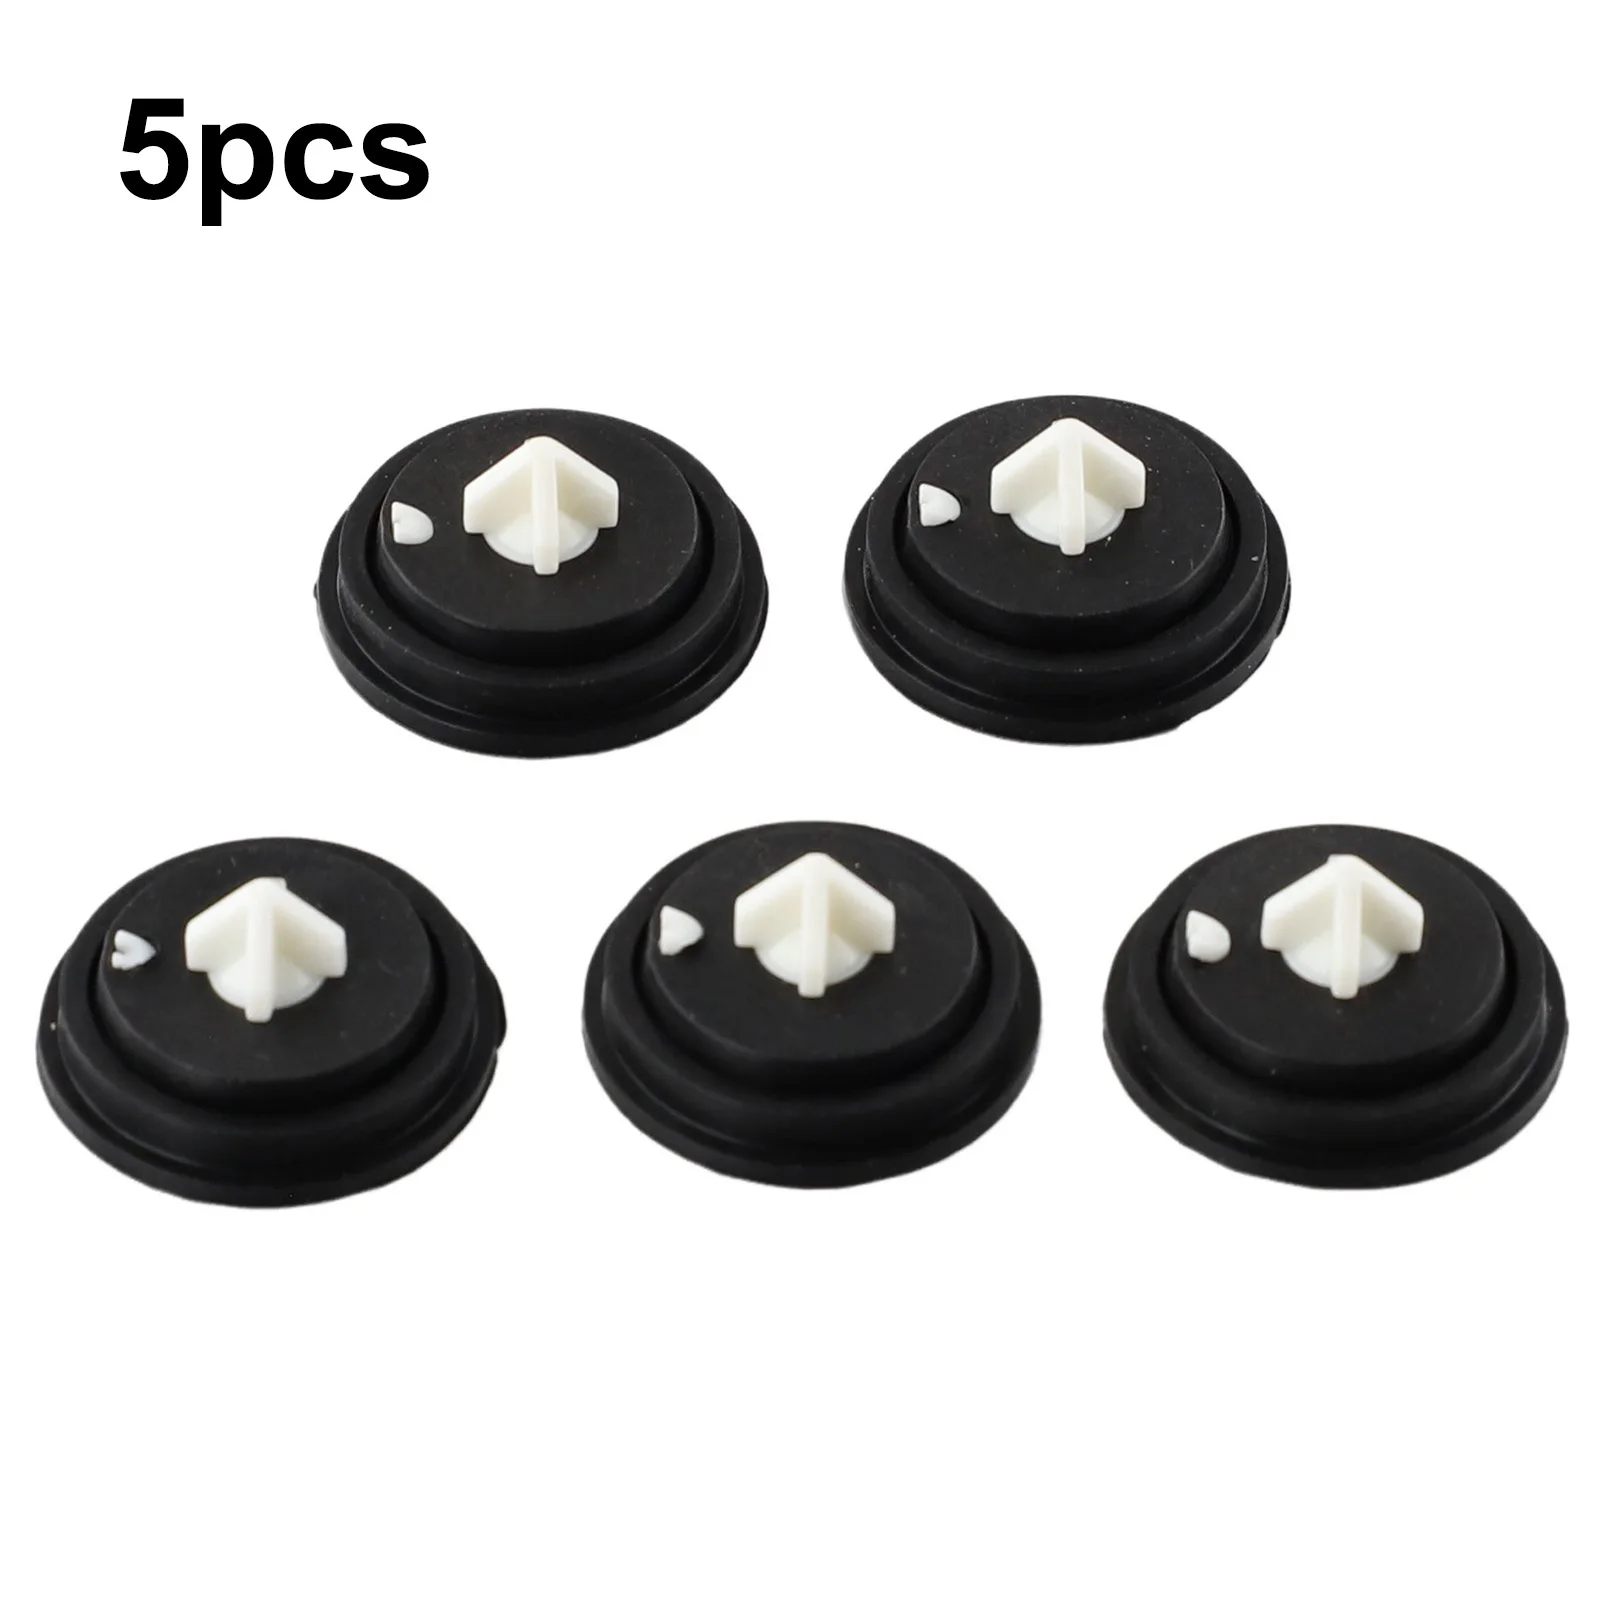 

5 Pcs Replacements Rubber Diaphragm Washer Fits All Siamp Fill Valves Ballvalve Bathroom Tools 28*12.3mm